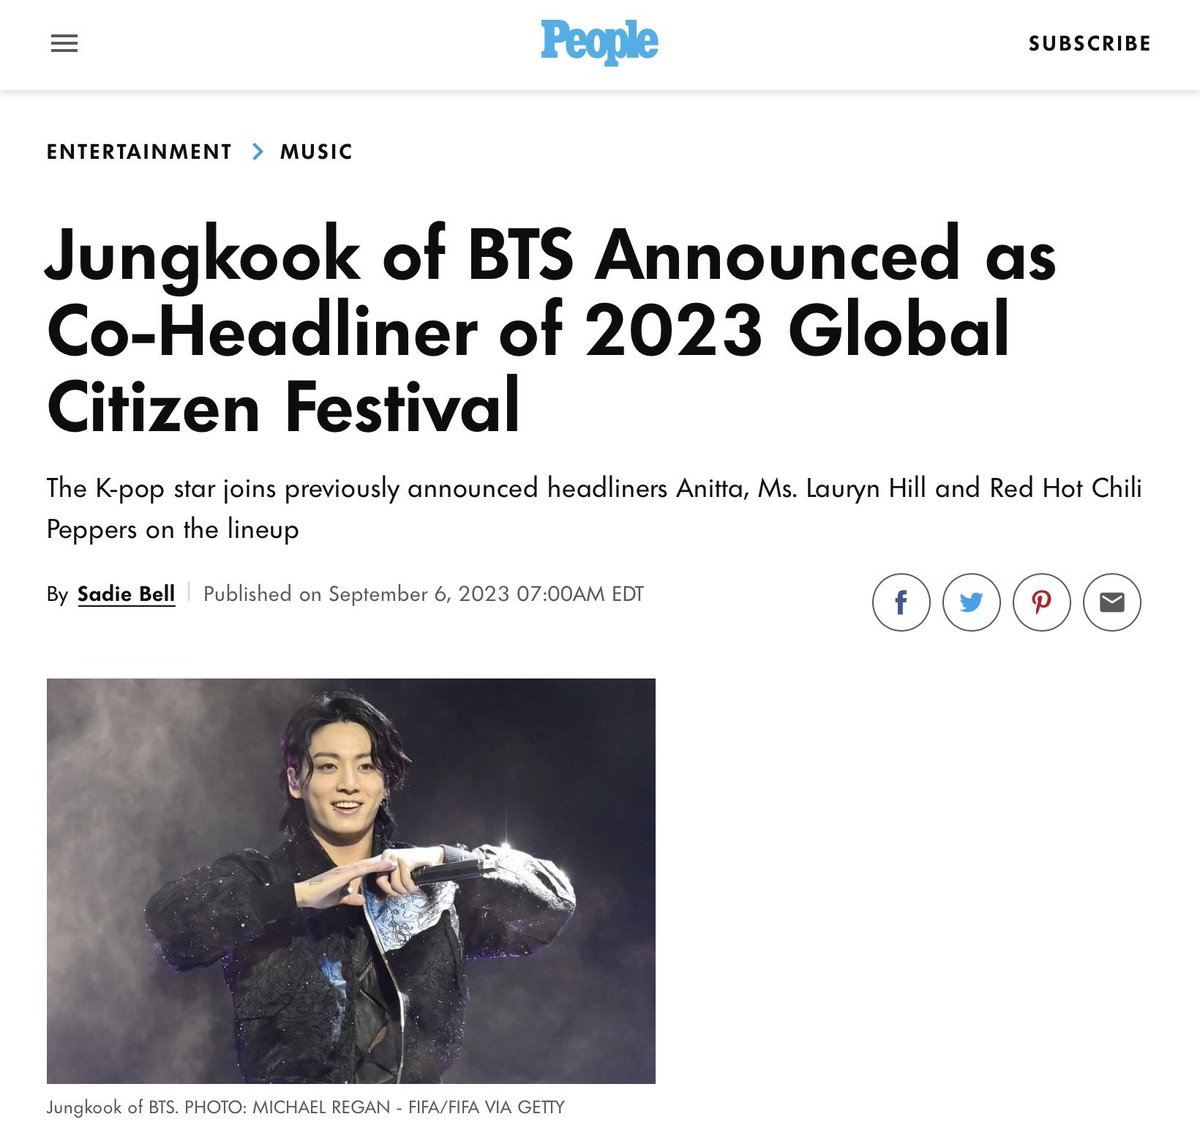 omg jungkook will co-headline the 2023 global citizen festival, held in nyc’s central park on september 23🥺 

#Jungkook #Seven_Jungkook #JungKook_Seven #JUNGKOOKxCALVINKLEIN #jungkookbts #BTSARMY #weloveyoujungkook #BTS10thAnniversary #Citizen 
WE LOVE YOU JUNGKOOK